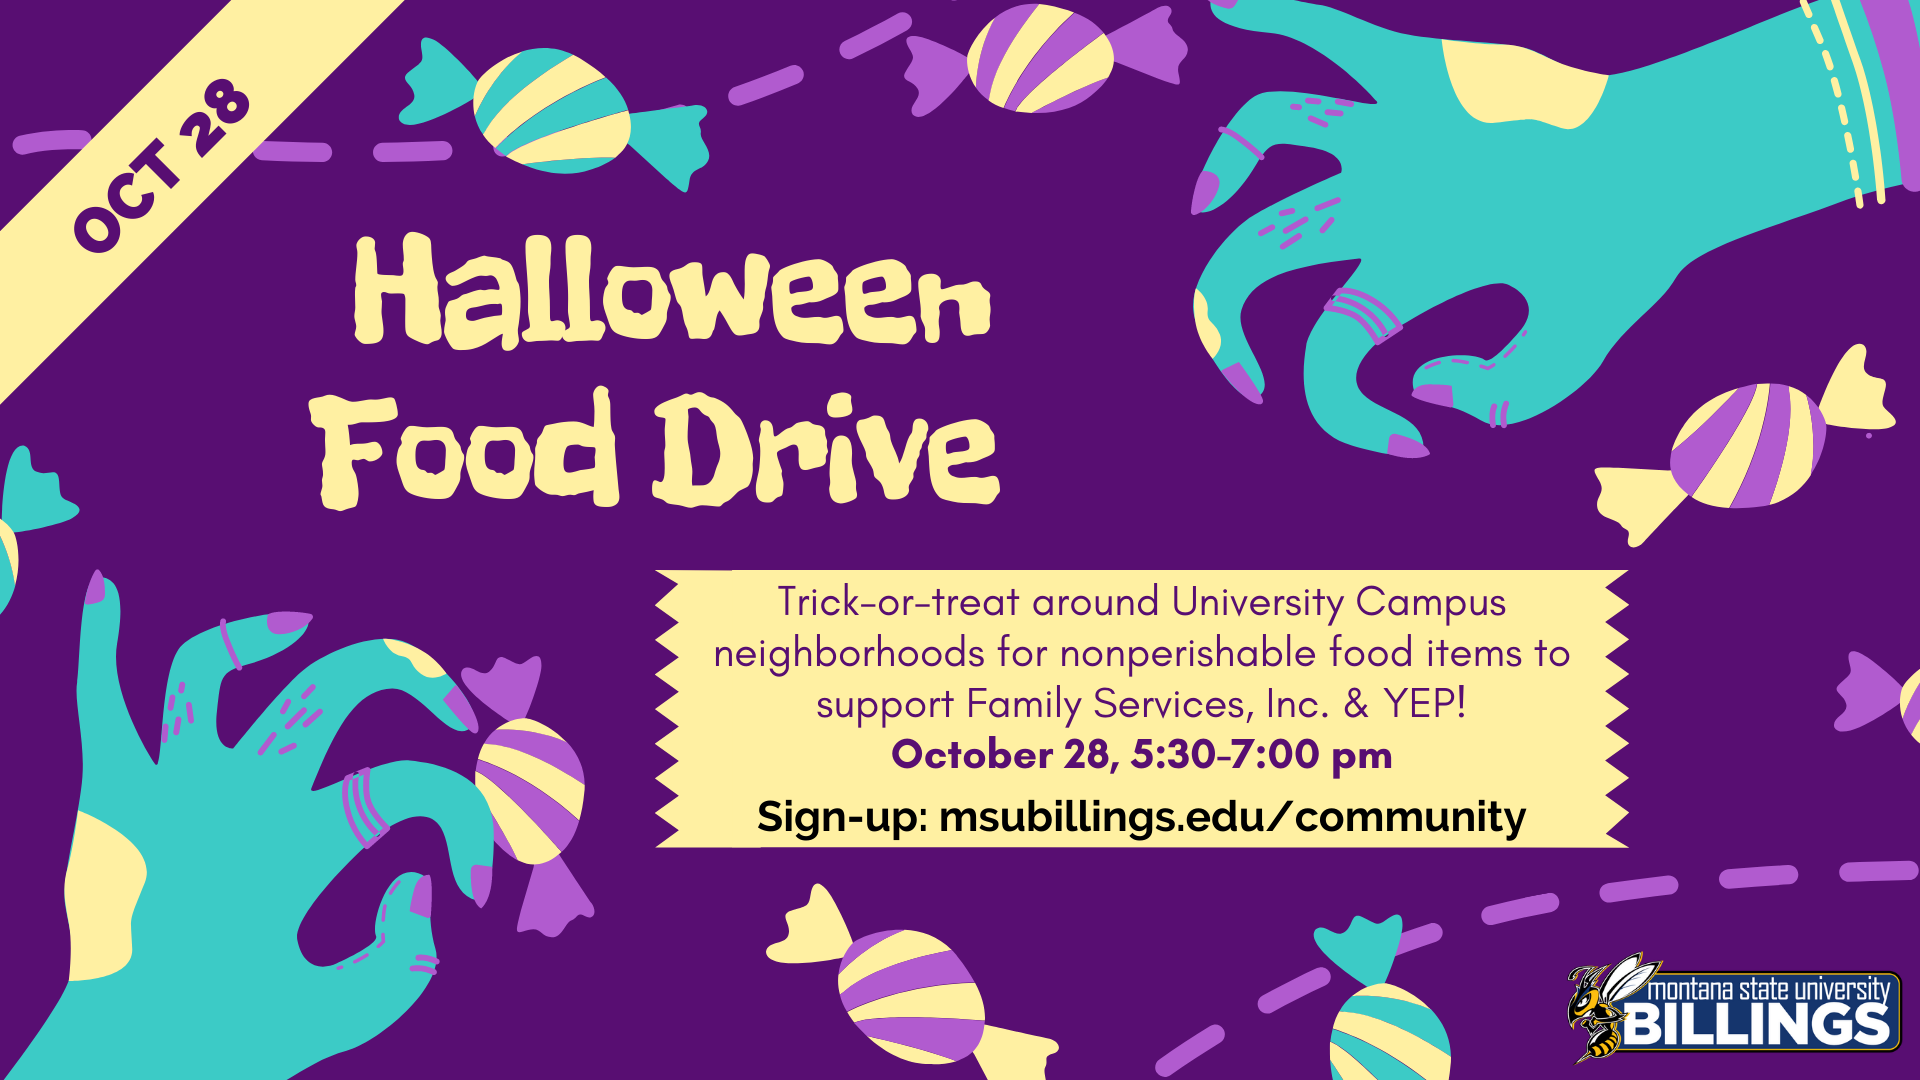 Halloween Food Drive. Trick-or-treat around University Campus neighborhoods for nonperishable food items to support Family Services, Inc. & YEP! October 28, 5:30-7:00 pm. Sign up online.